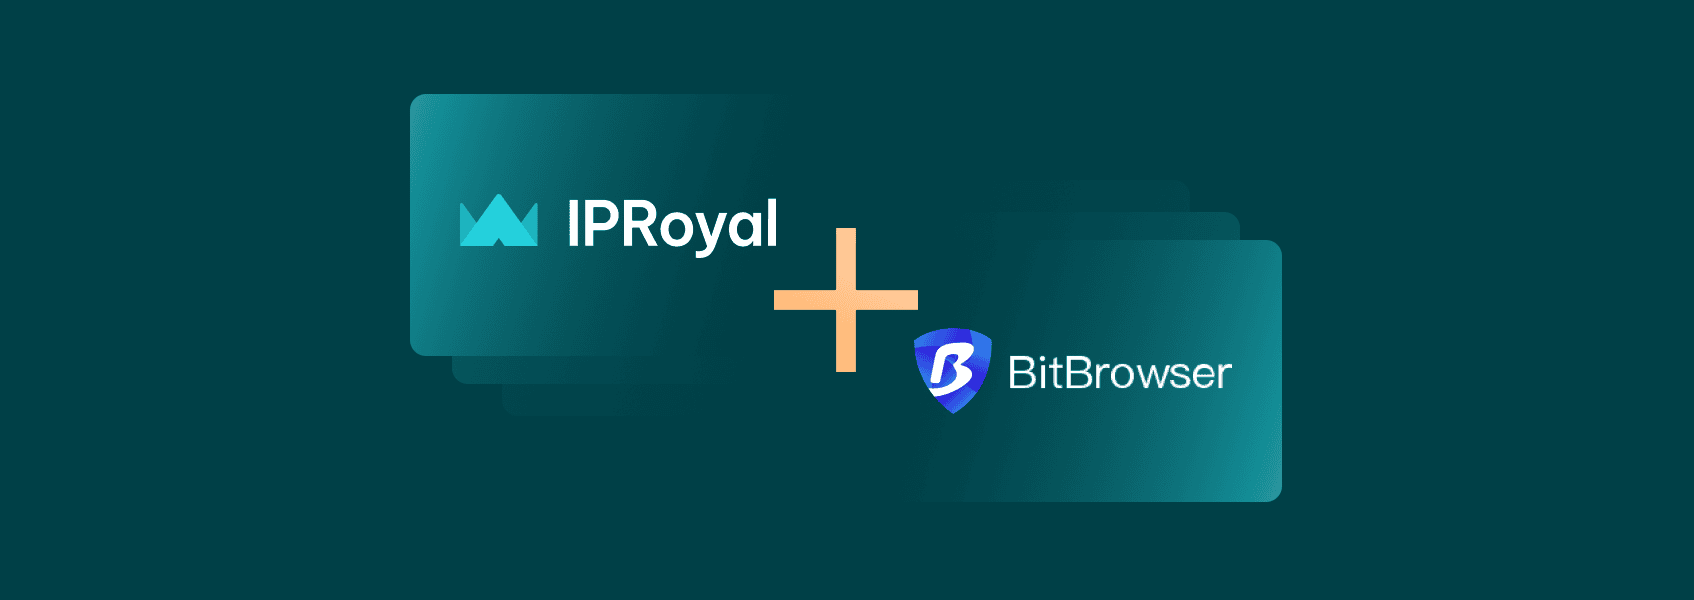 How to Set Up a BitBrowser Proxy With IPRoyal